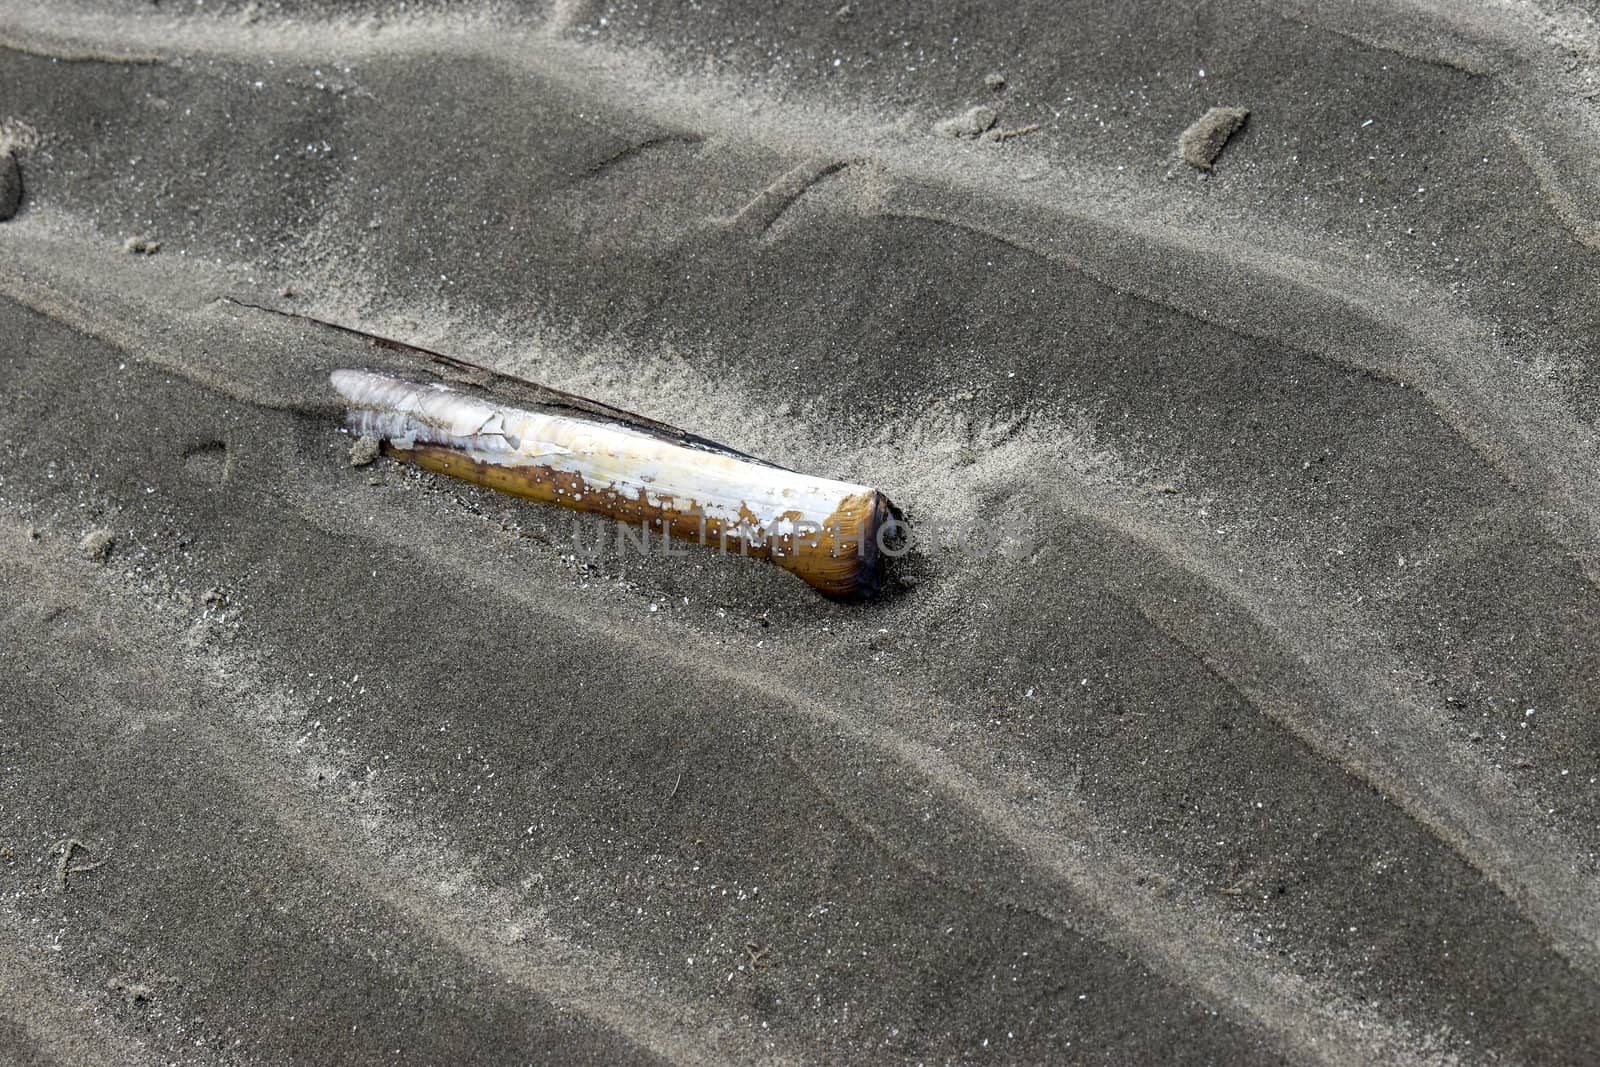 Razor clam shell on a sandy beach in Ireland background by benentaylor